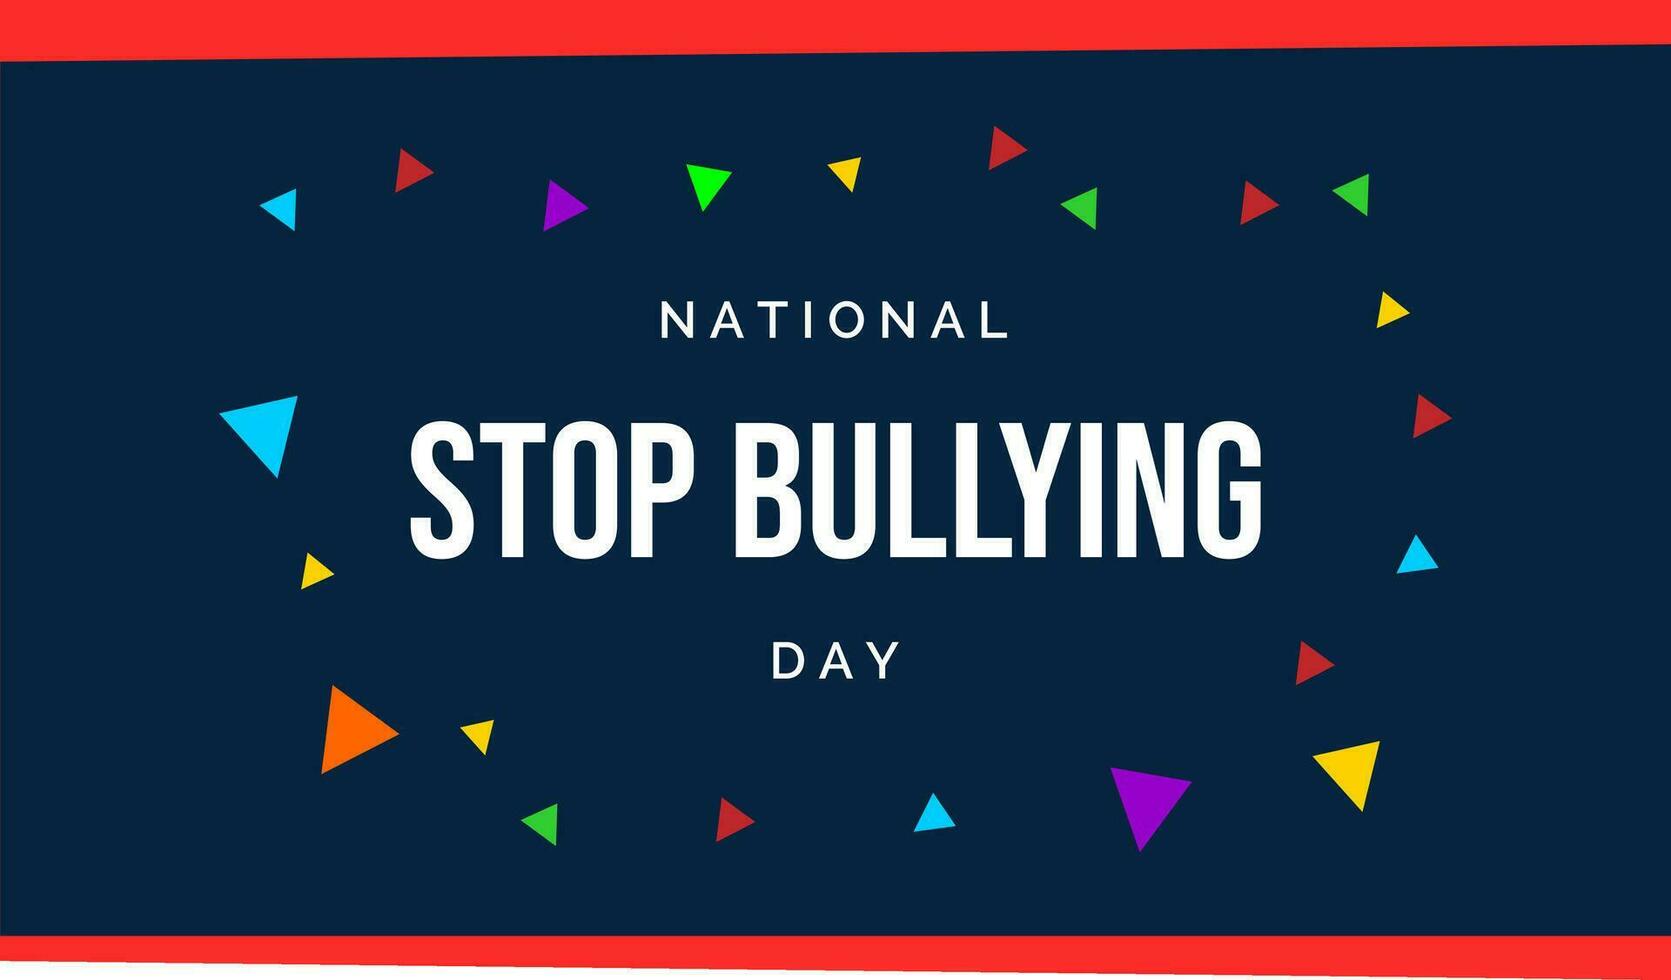 national stop bullying day vector